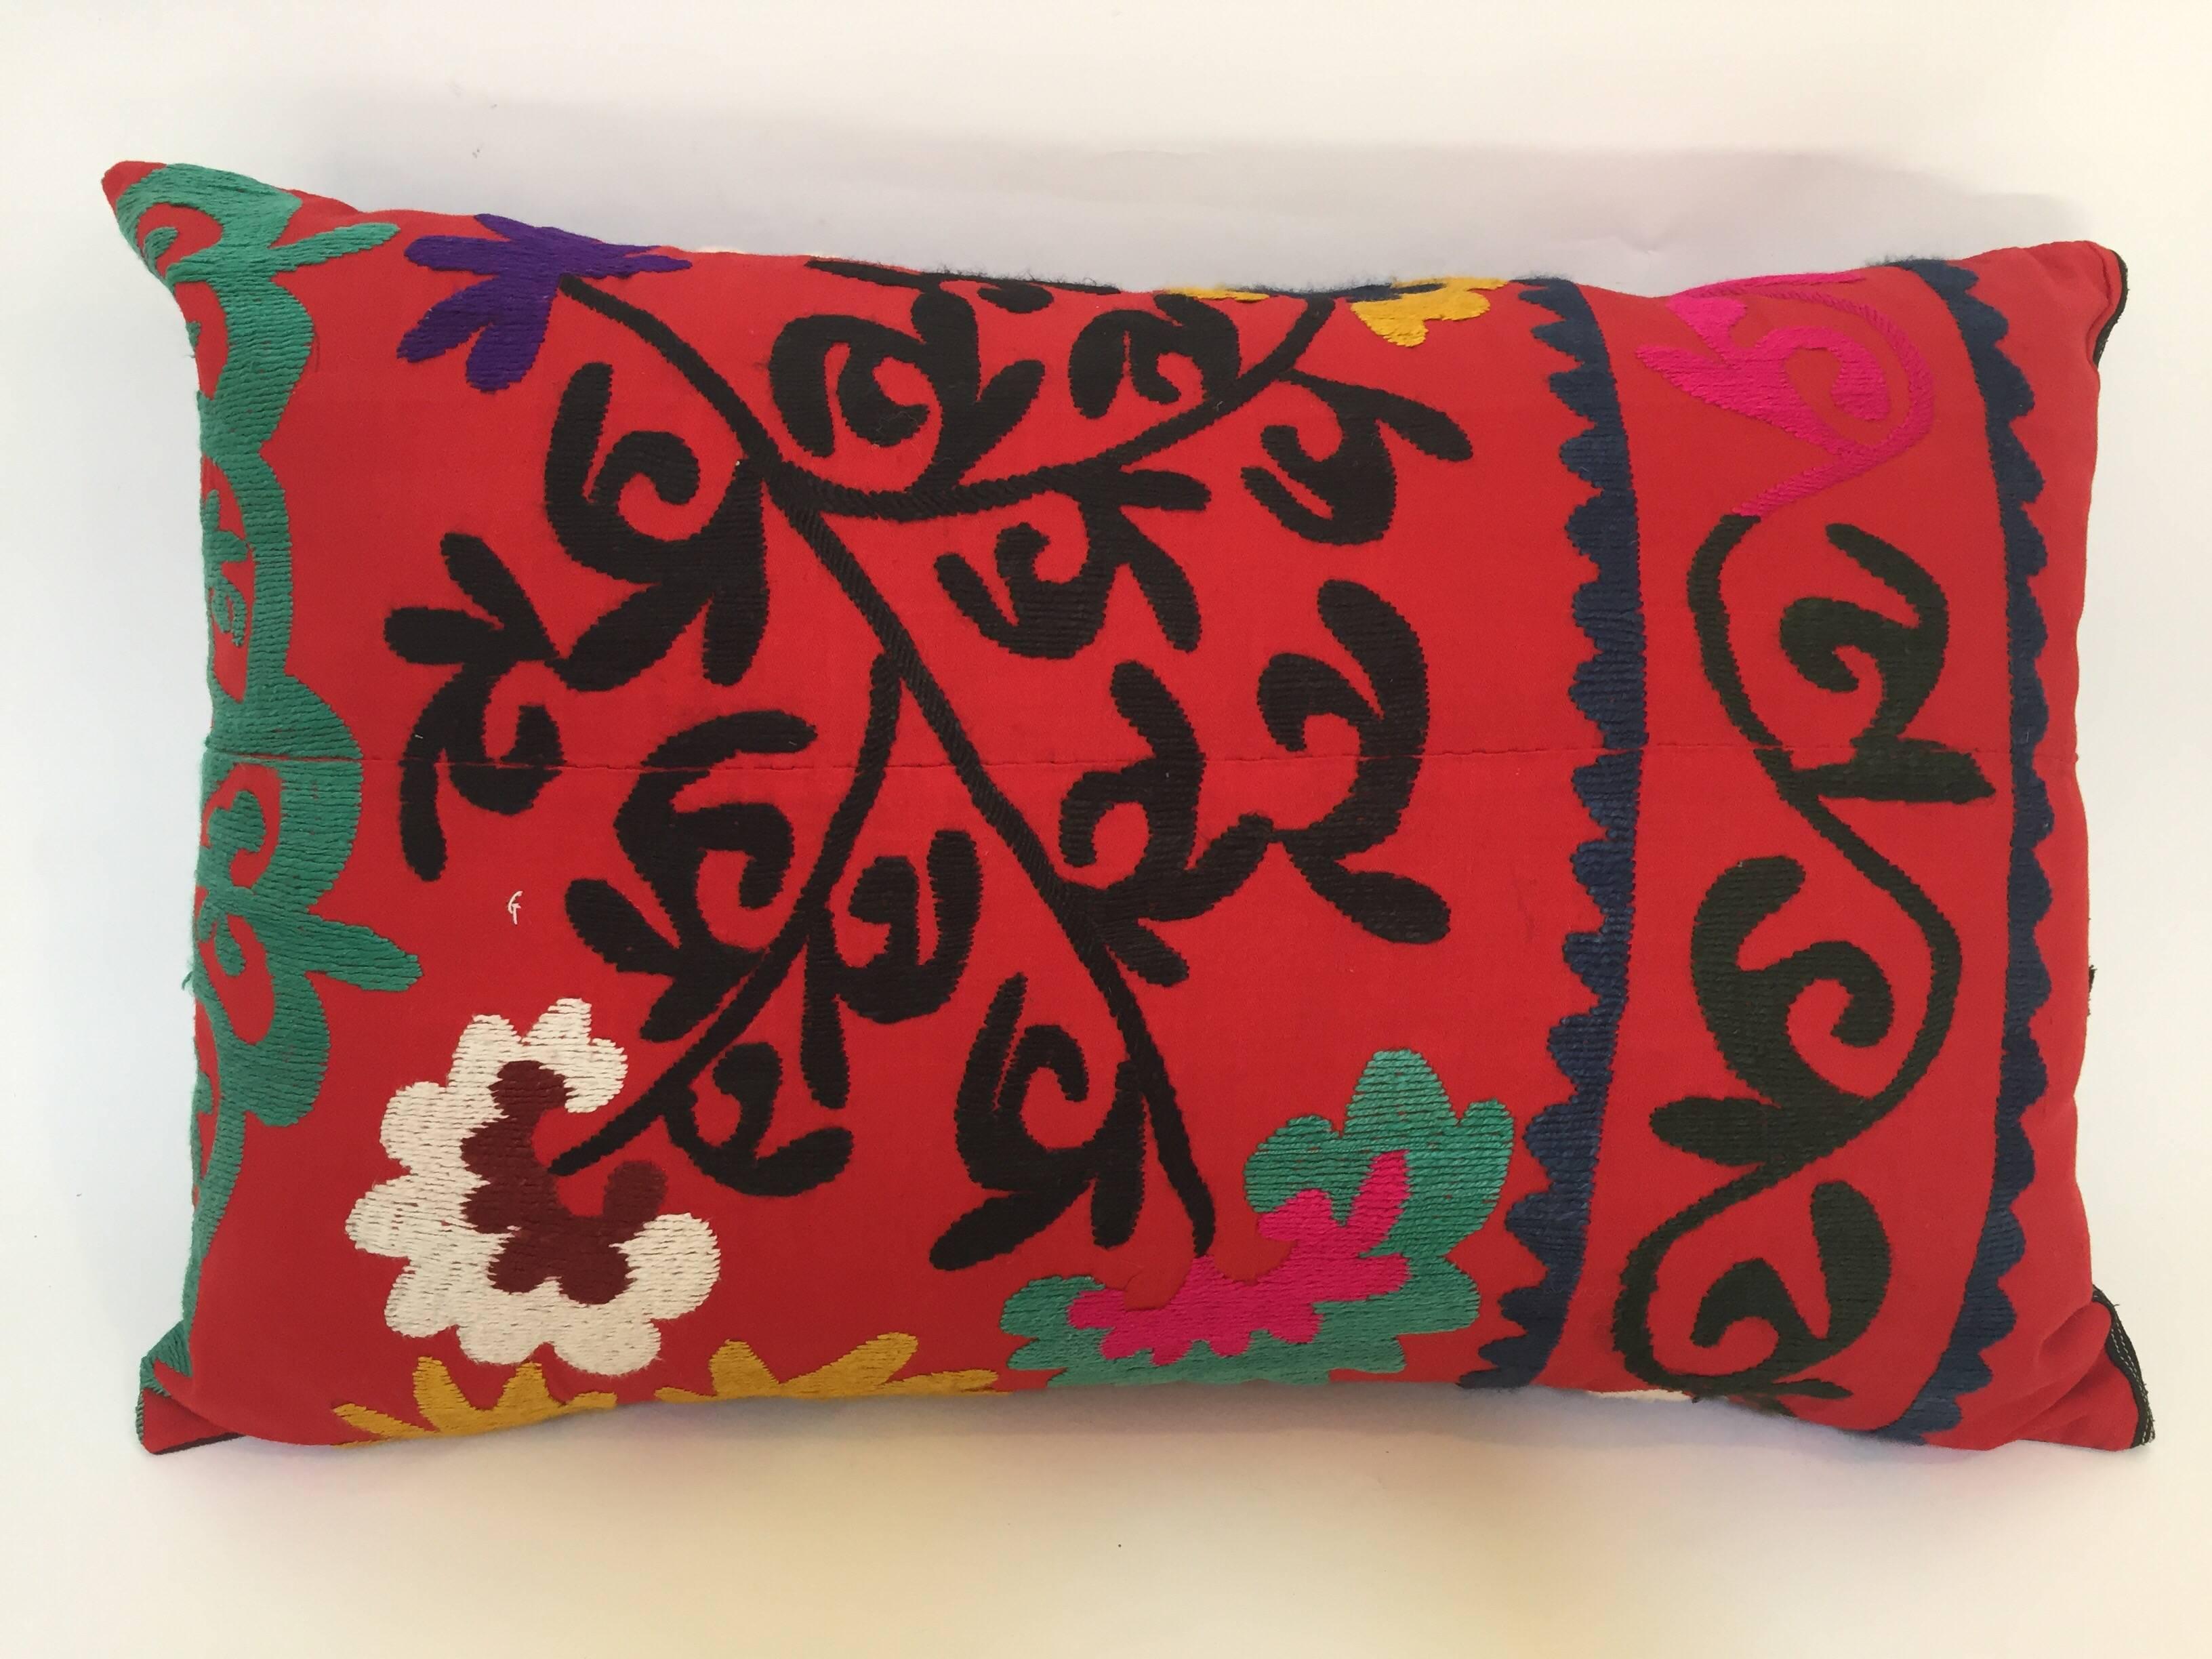 Large vintage colorful Suzani embroidery lumbar pillow red with colorful threads. 
A reddish embroidered pillow with flower motifs in shades of black, red, yellow, white, magenta, kelly green, with linen backing and zipper in the back,. 
The pillow